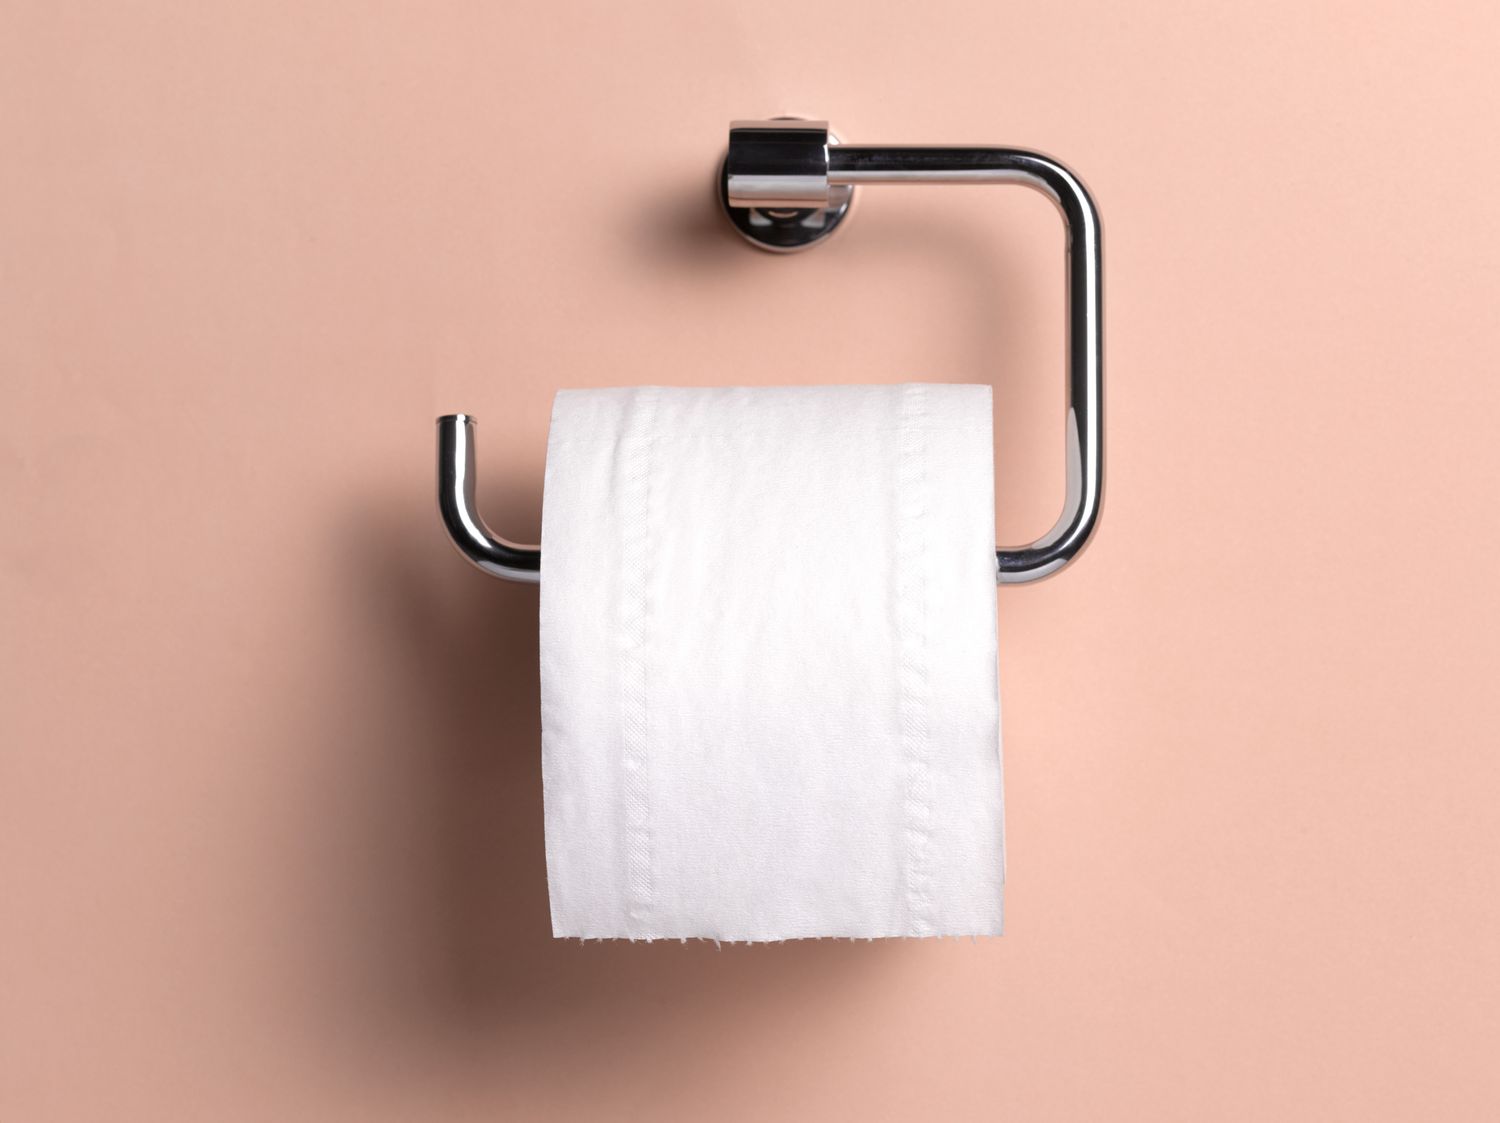 Scientists Say This Popular Bathroom Accessory Really Does Help You Poop  Better | PEOPLE.com